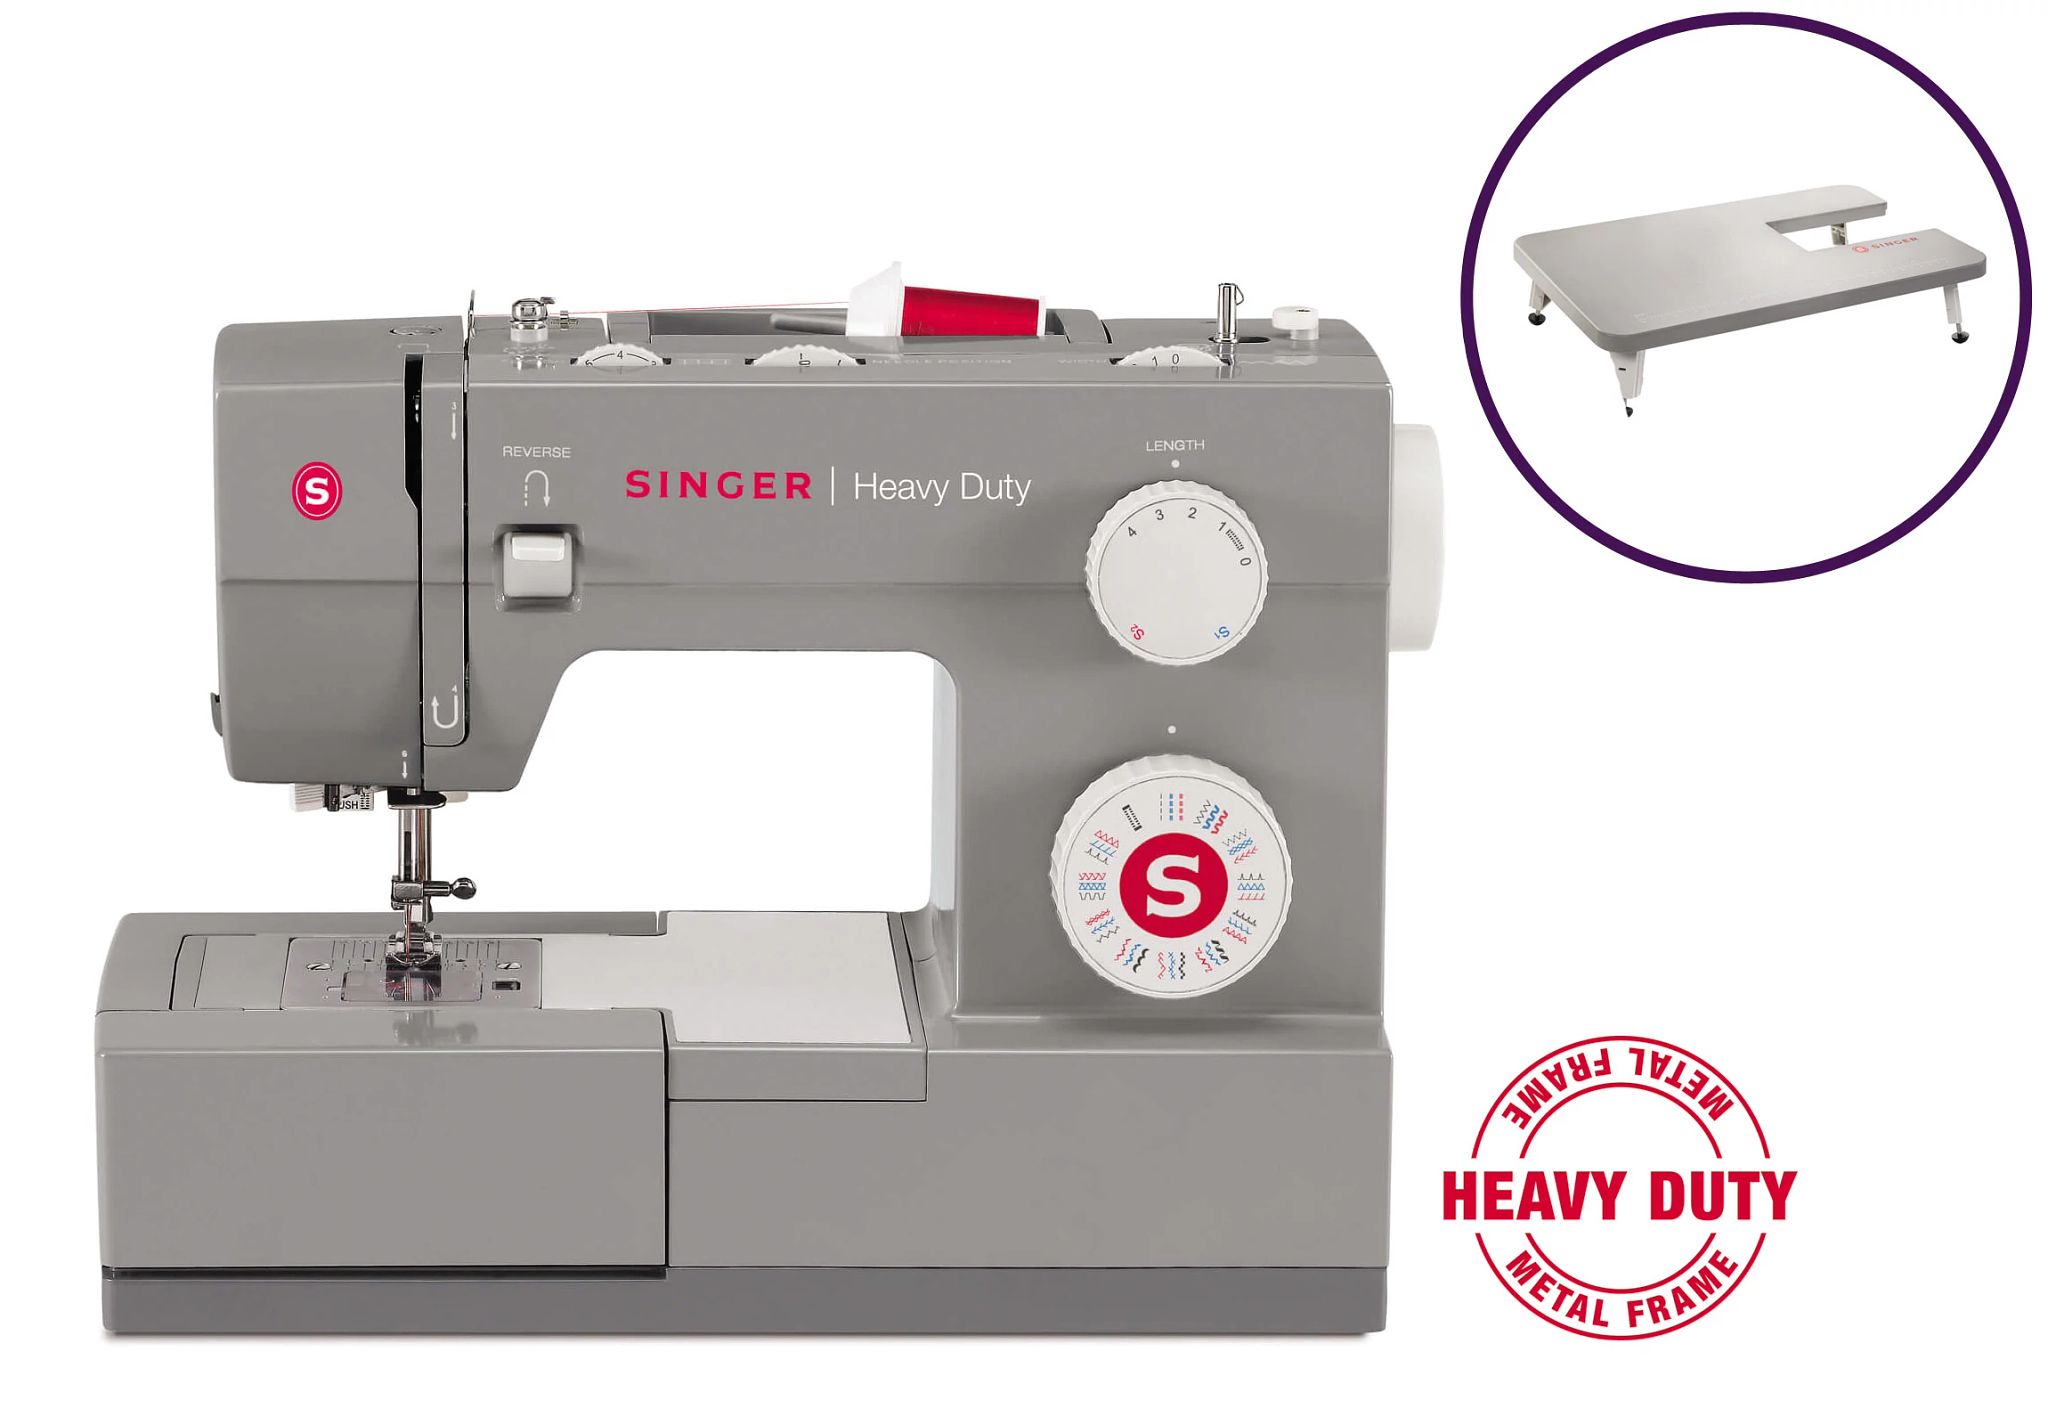 Singer 4432 Heavy Duty Sewing Machine + Extension Table